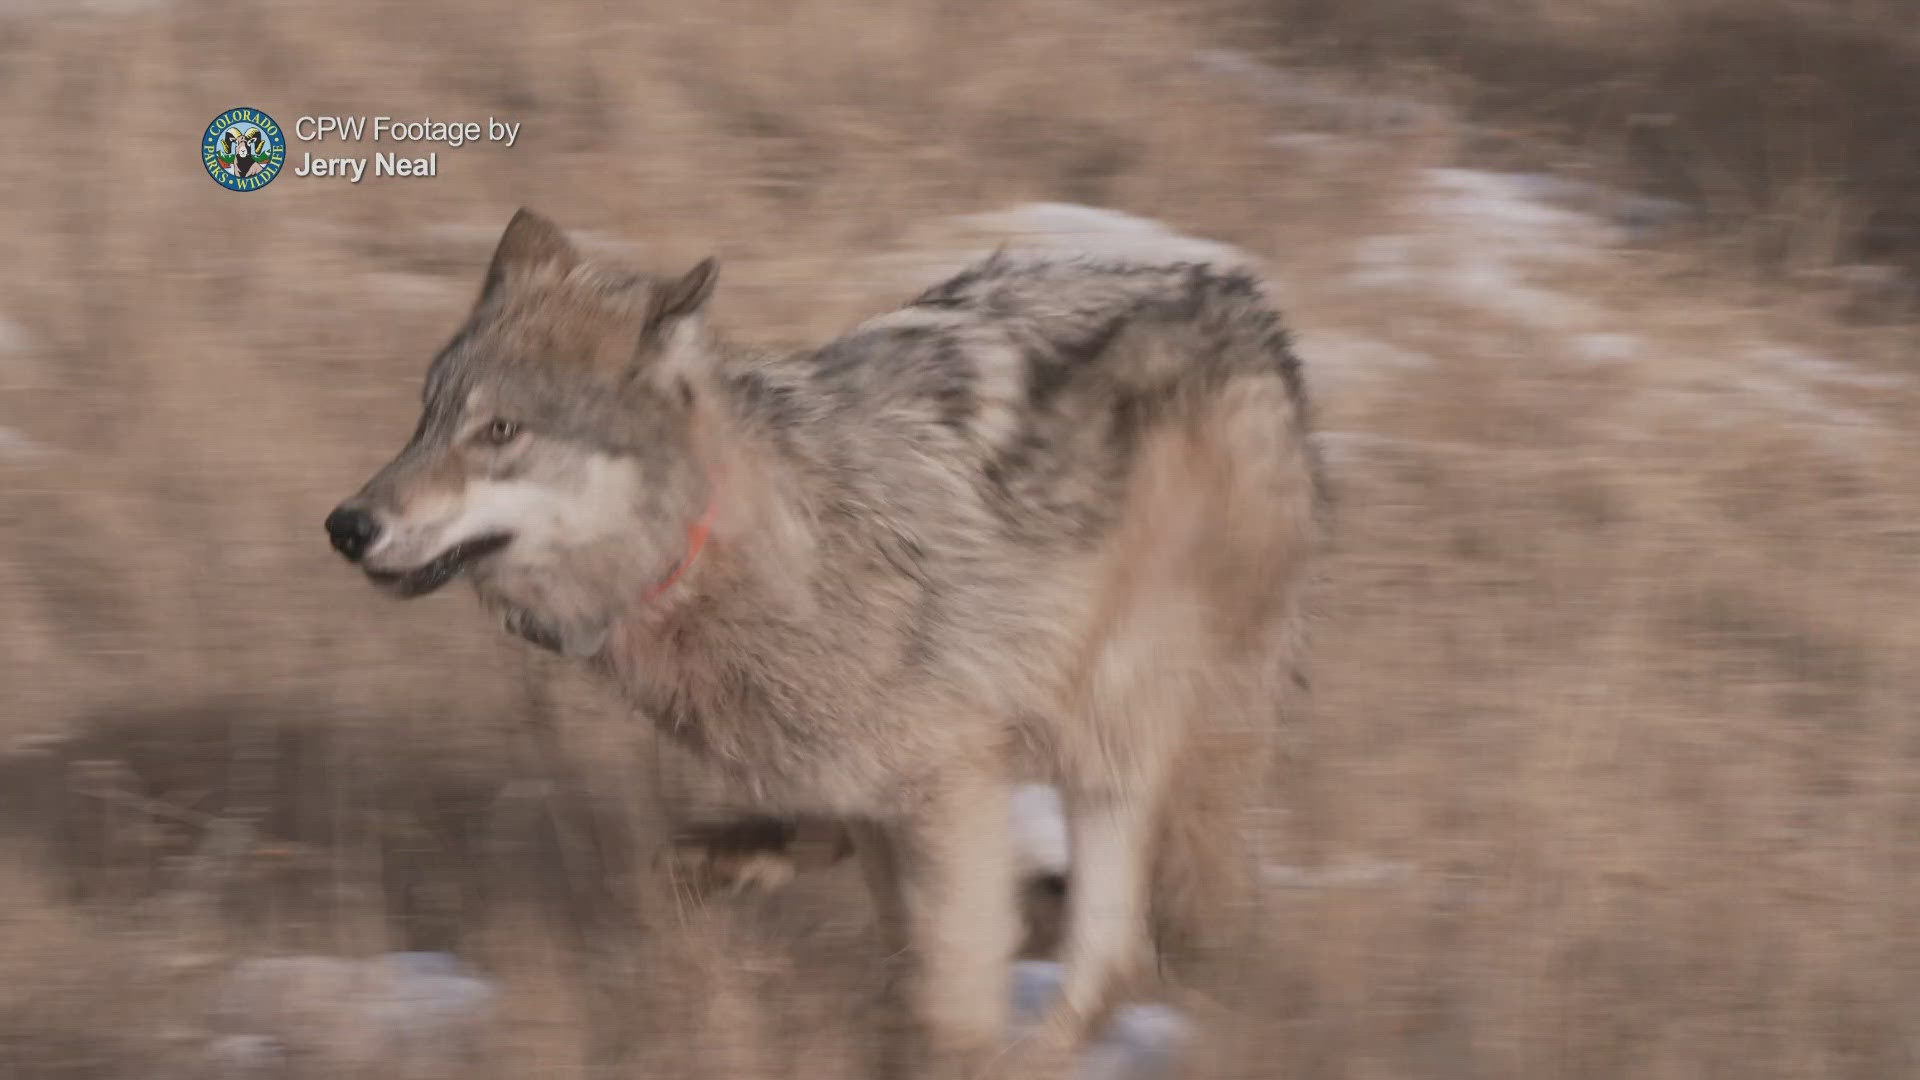 Two ranching organizations filed a federal lawsuit to halt gray wolf reintroduction. After Colorado reintroduced wolves, the plaintiffs dismissed their lawsuit.